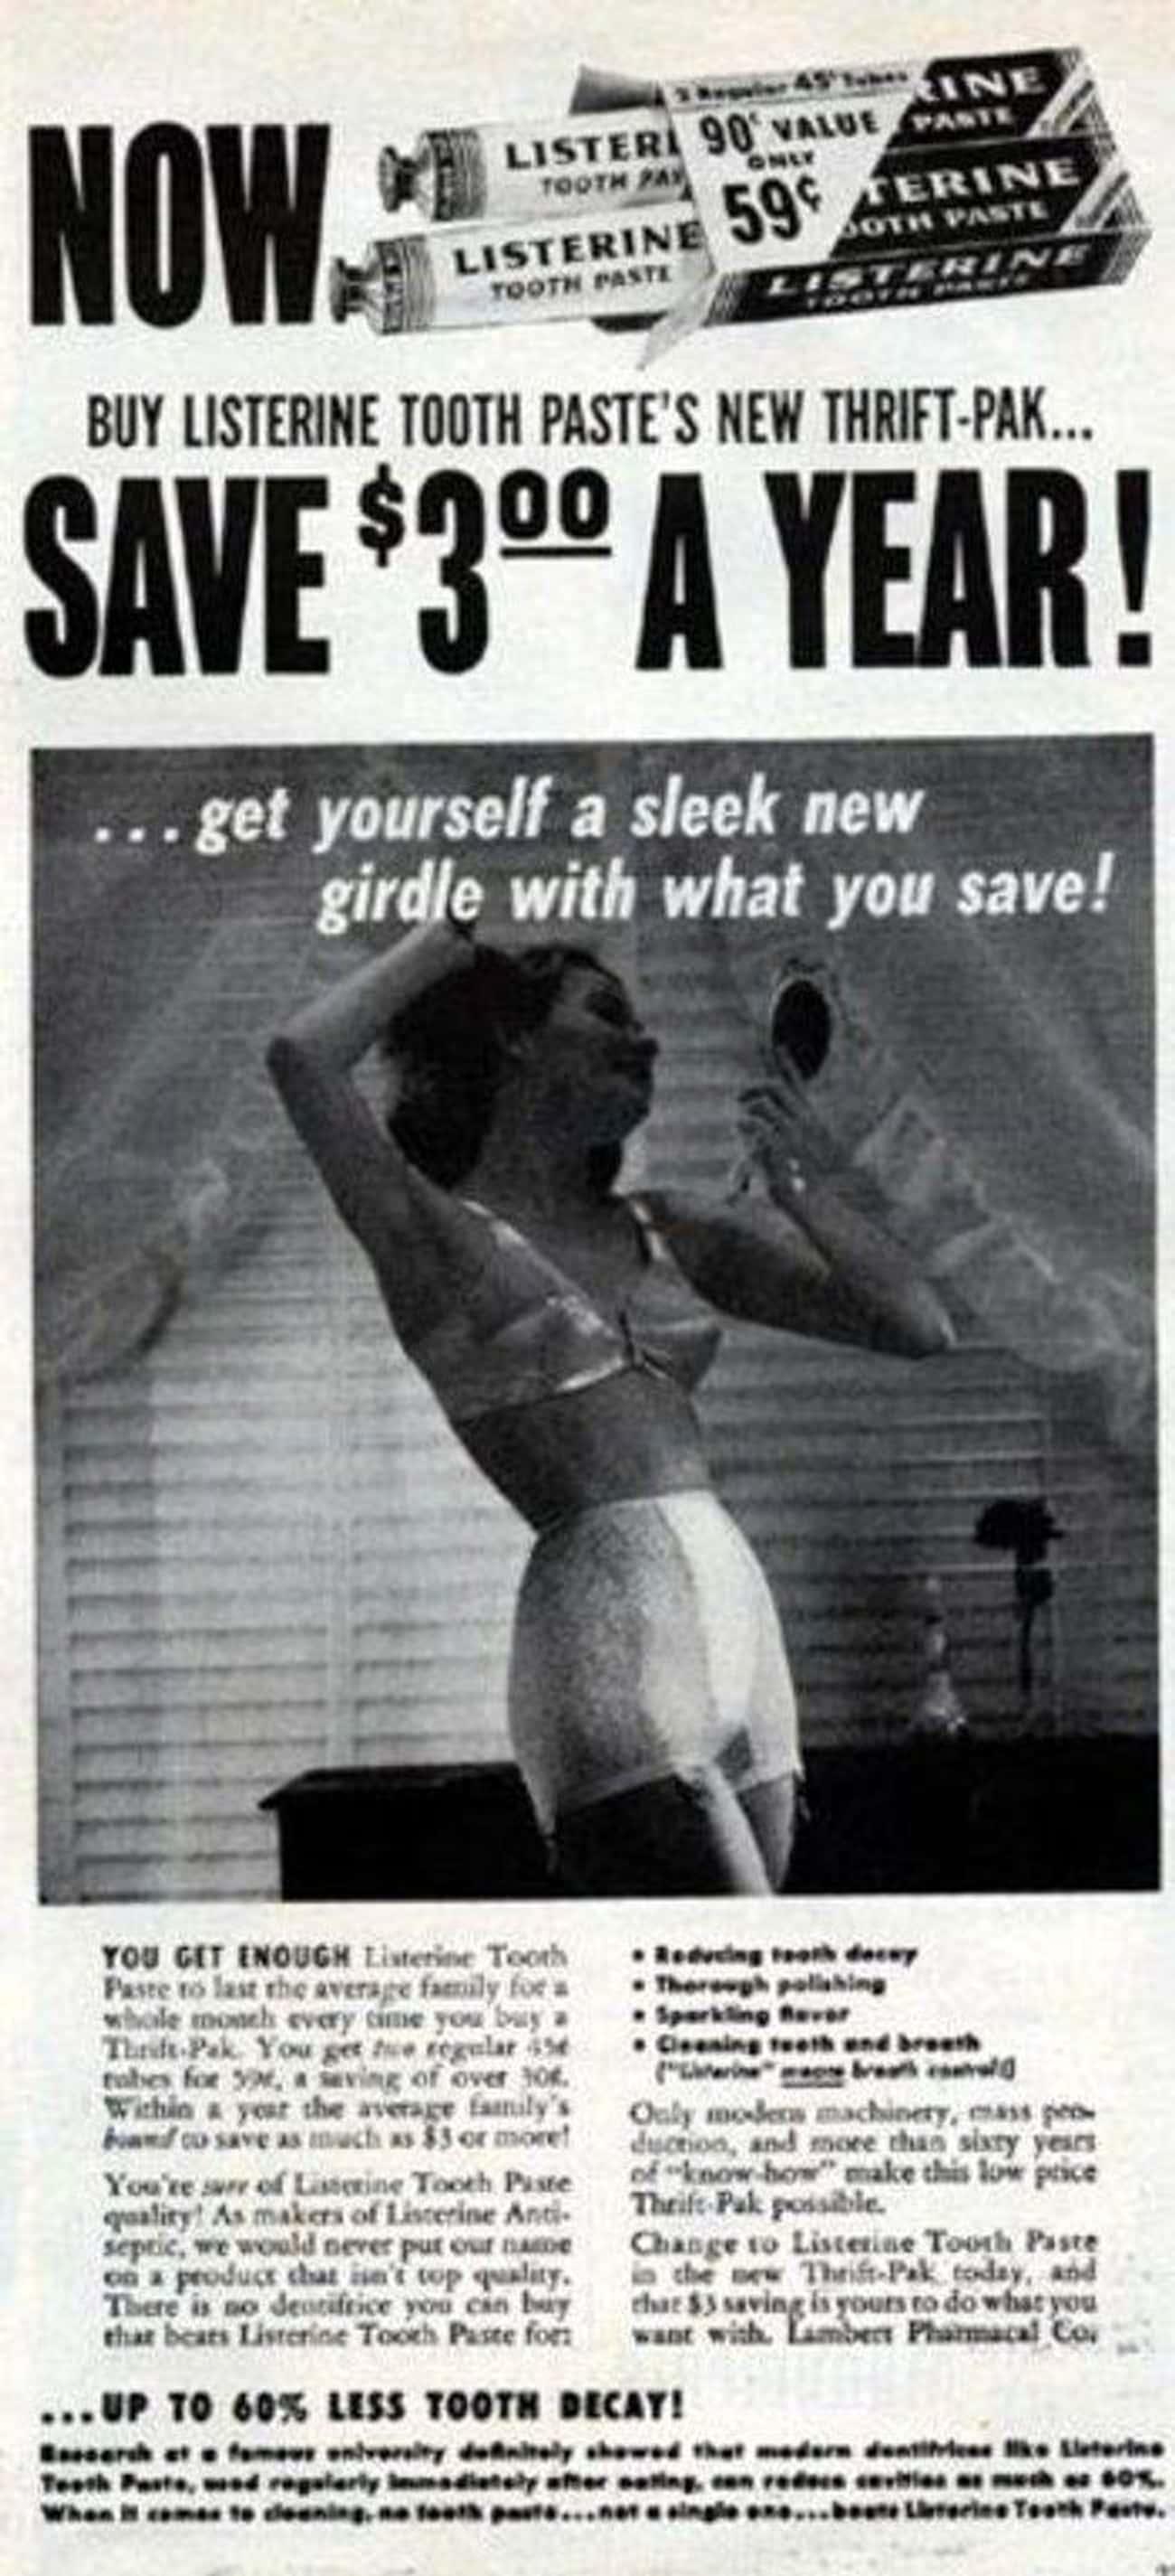 'Get Yourself A Sleek New Girdle With What You Save!'